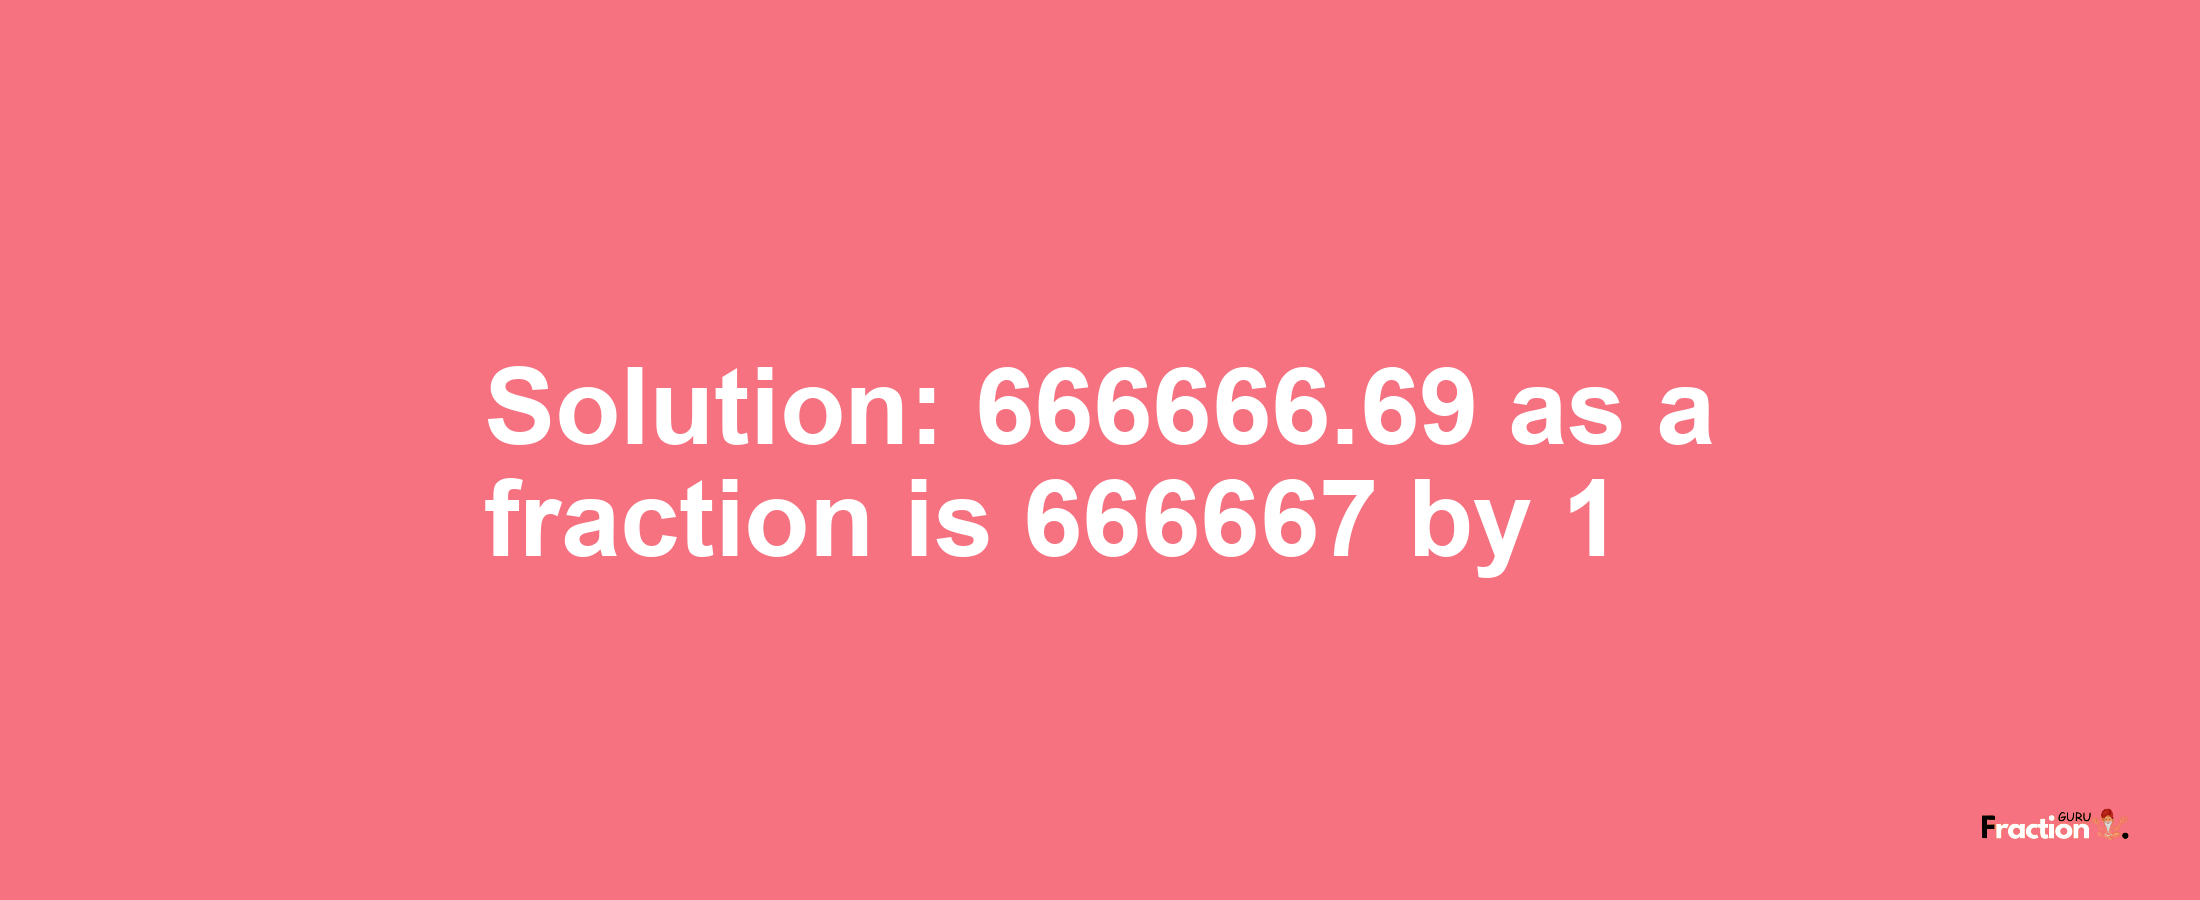 Solution:666666.69 as a fraction is 666667/1